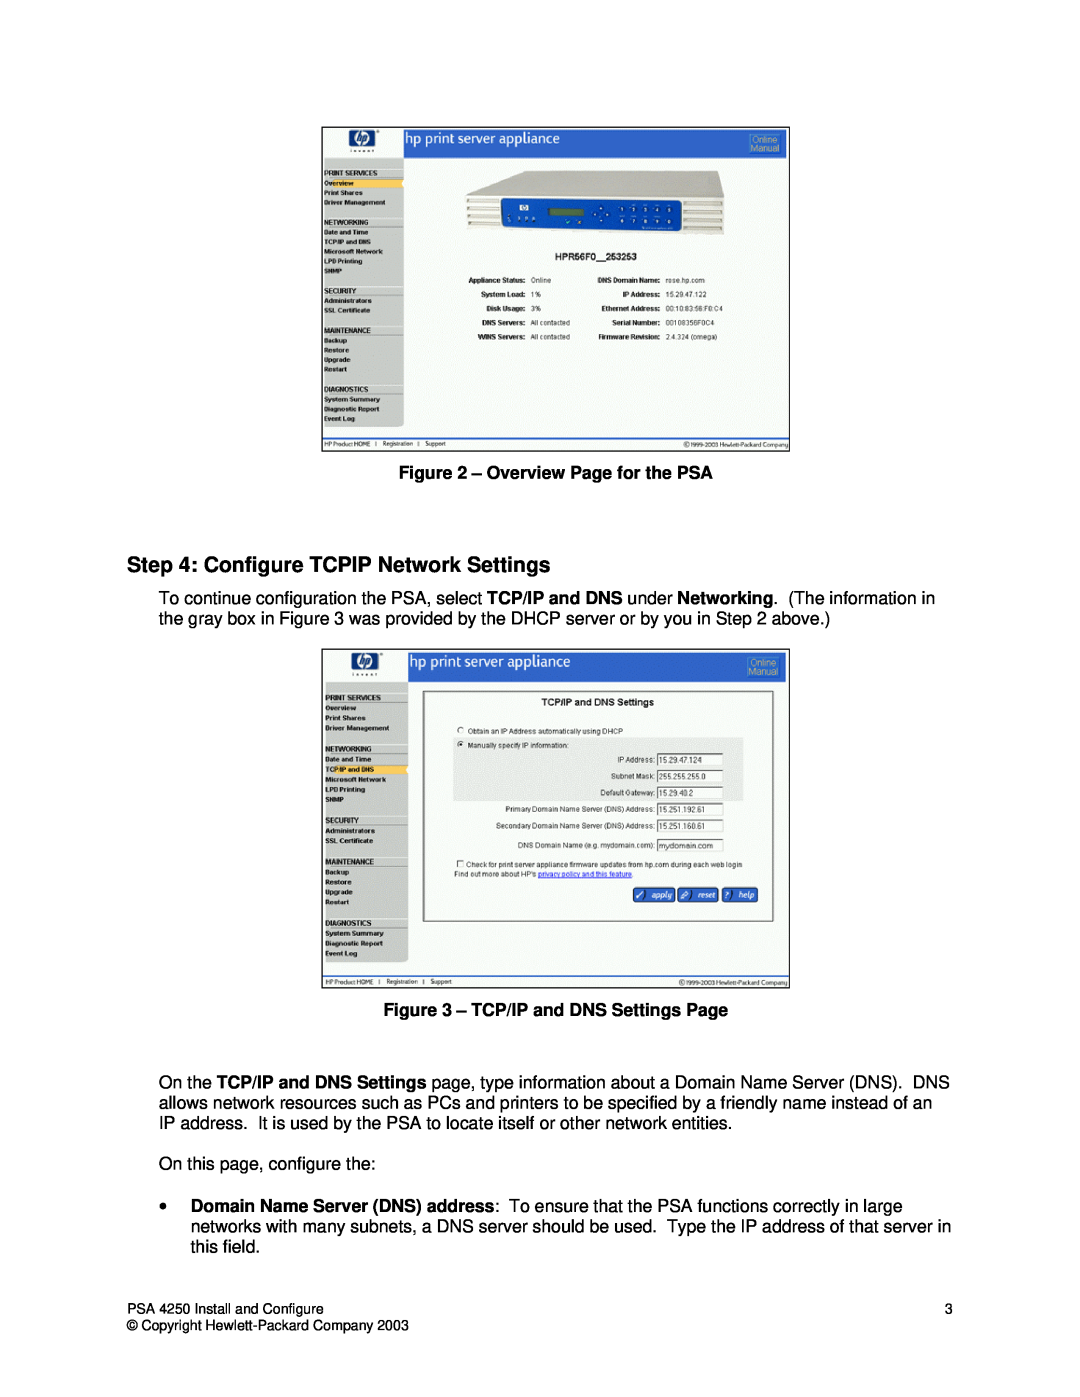 HP Print Server Appliance 4250 Configure TCPIP Network Settings, Overview Page for the PSA, TCP/IP and DNS Settings Page 